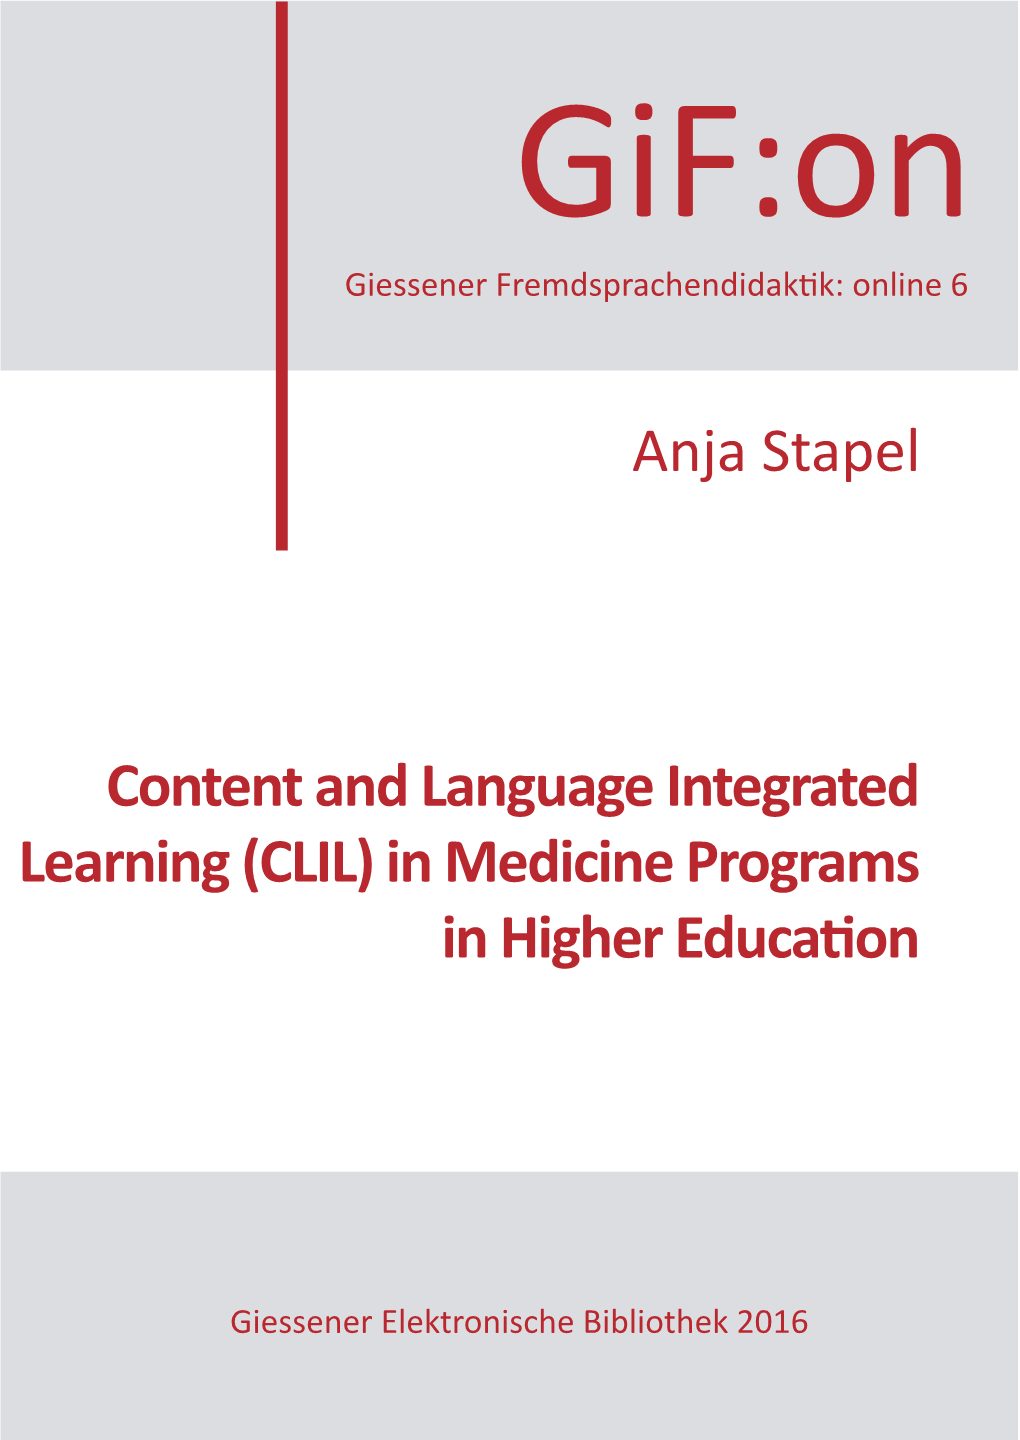 (CLIL) in Medicine Programs in Higher Education Stapel Content and Language Integrated Learning Integrated and Language Content Stapel